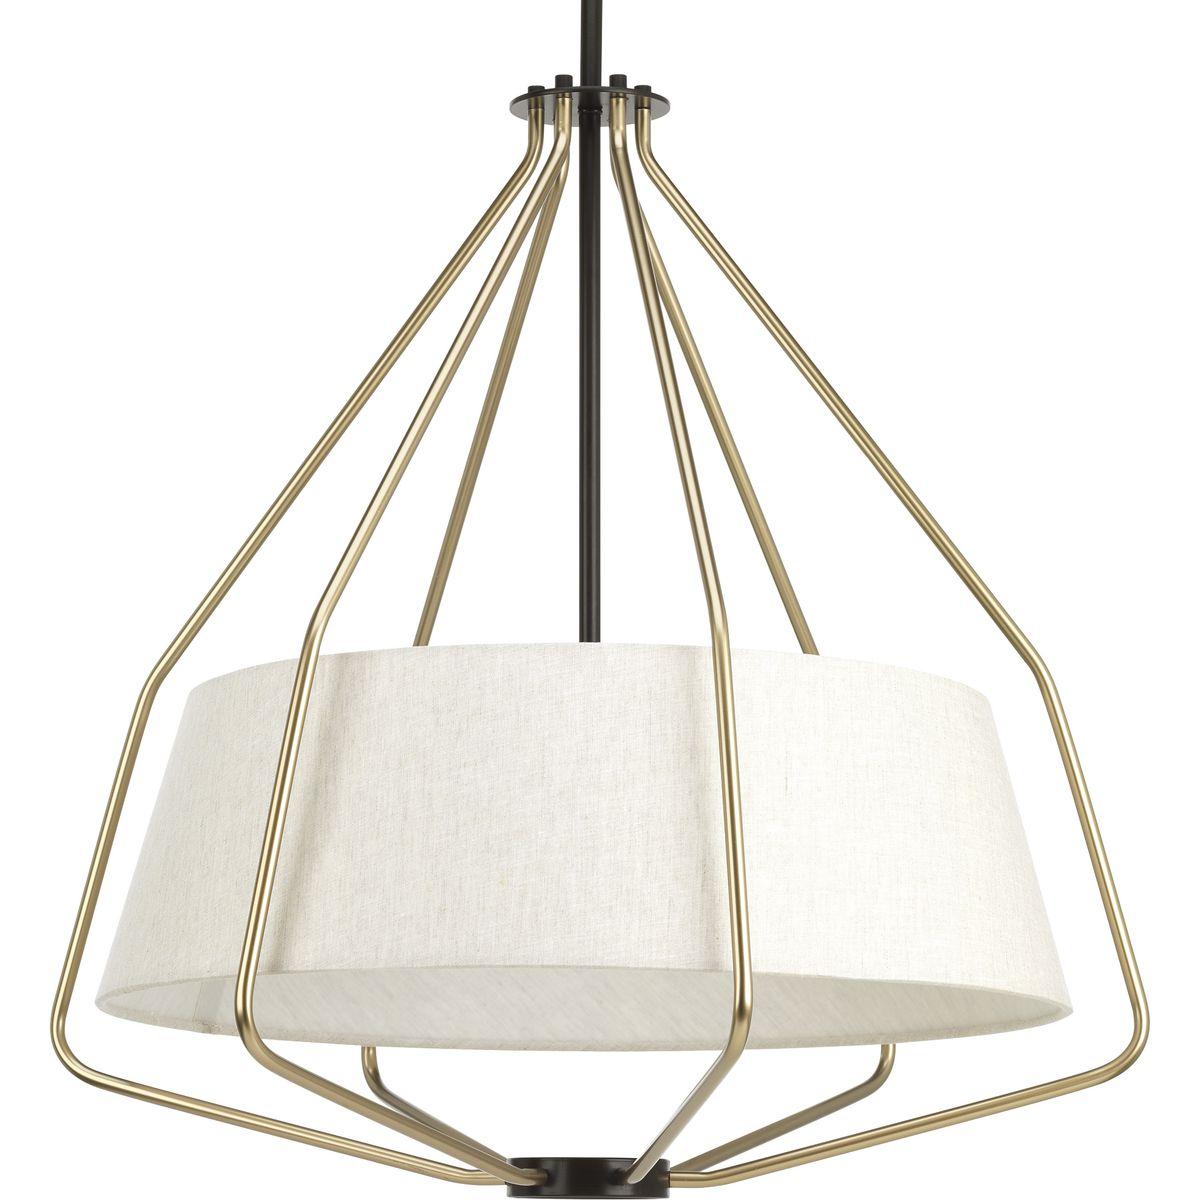 Hubbell P500117-020 The three-light pendant in the Hangar collection is a fun, light and airy piece - perfect for both casual and modern homes. A sophisticated, statement-making frame occupies a large visual space. Modern wire basket forms are finished in Antique Bronze and 